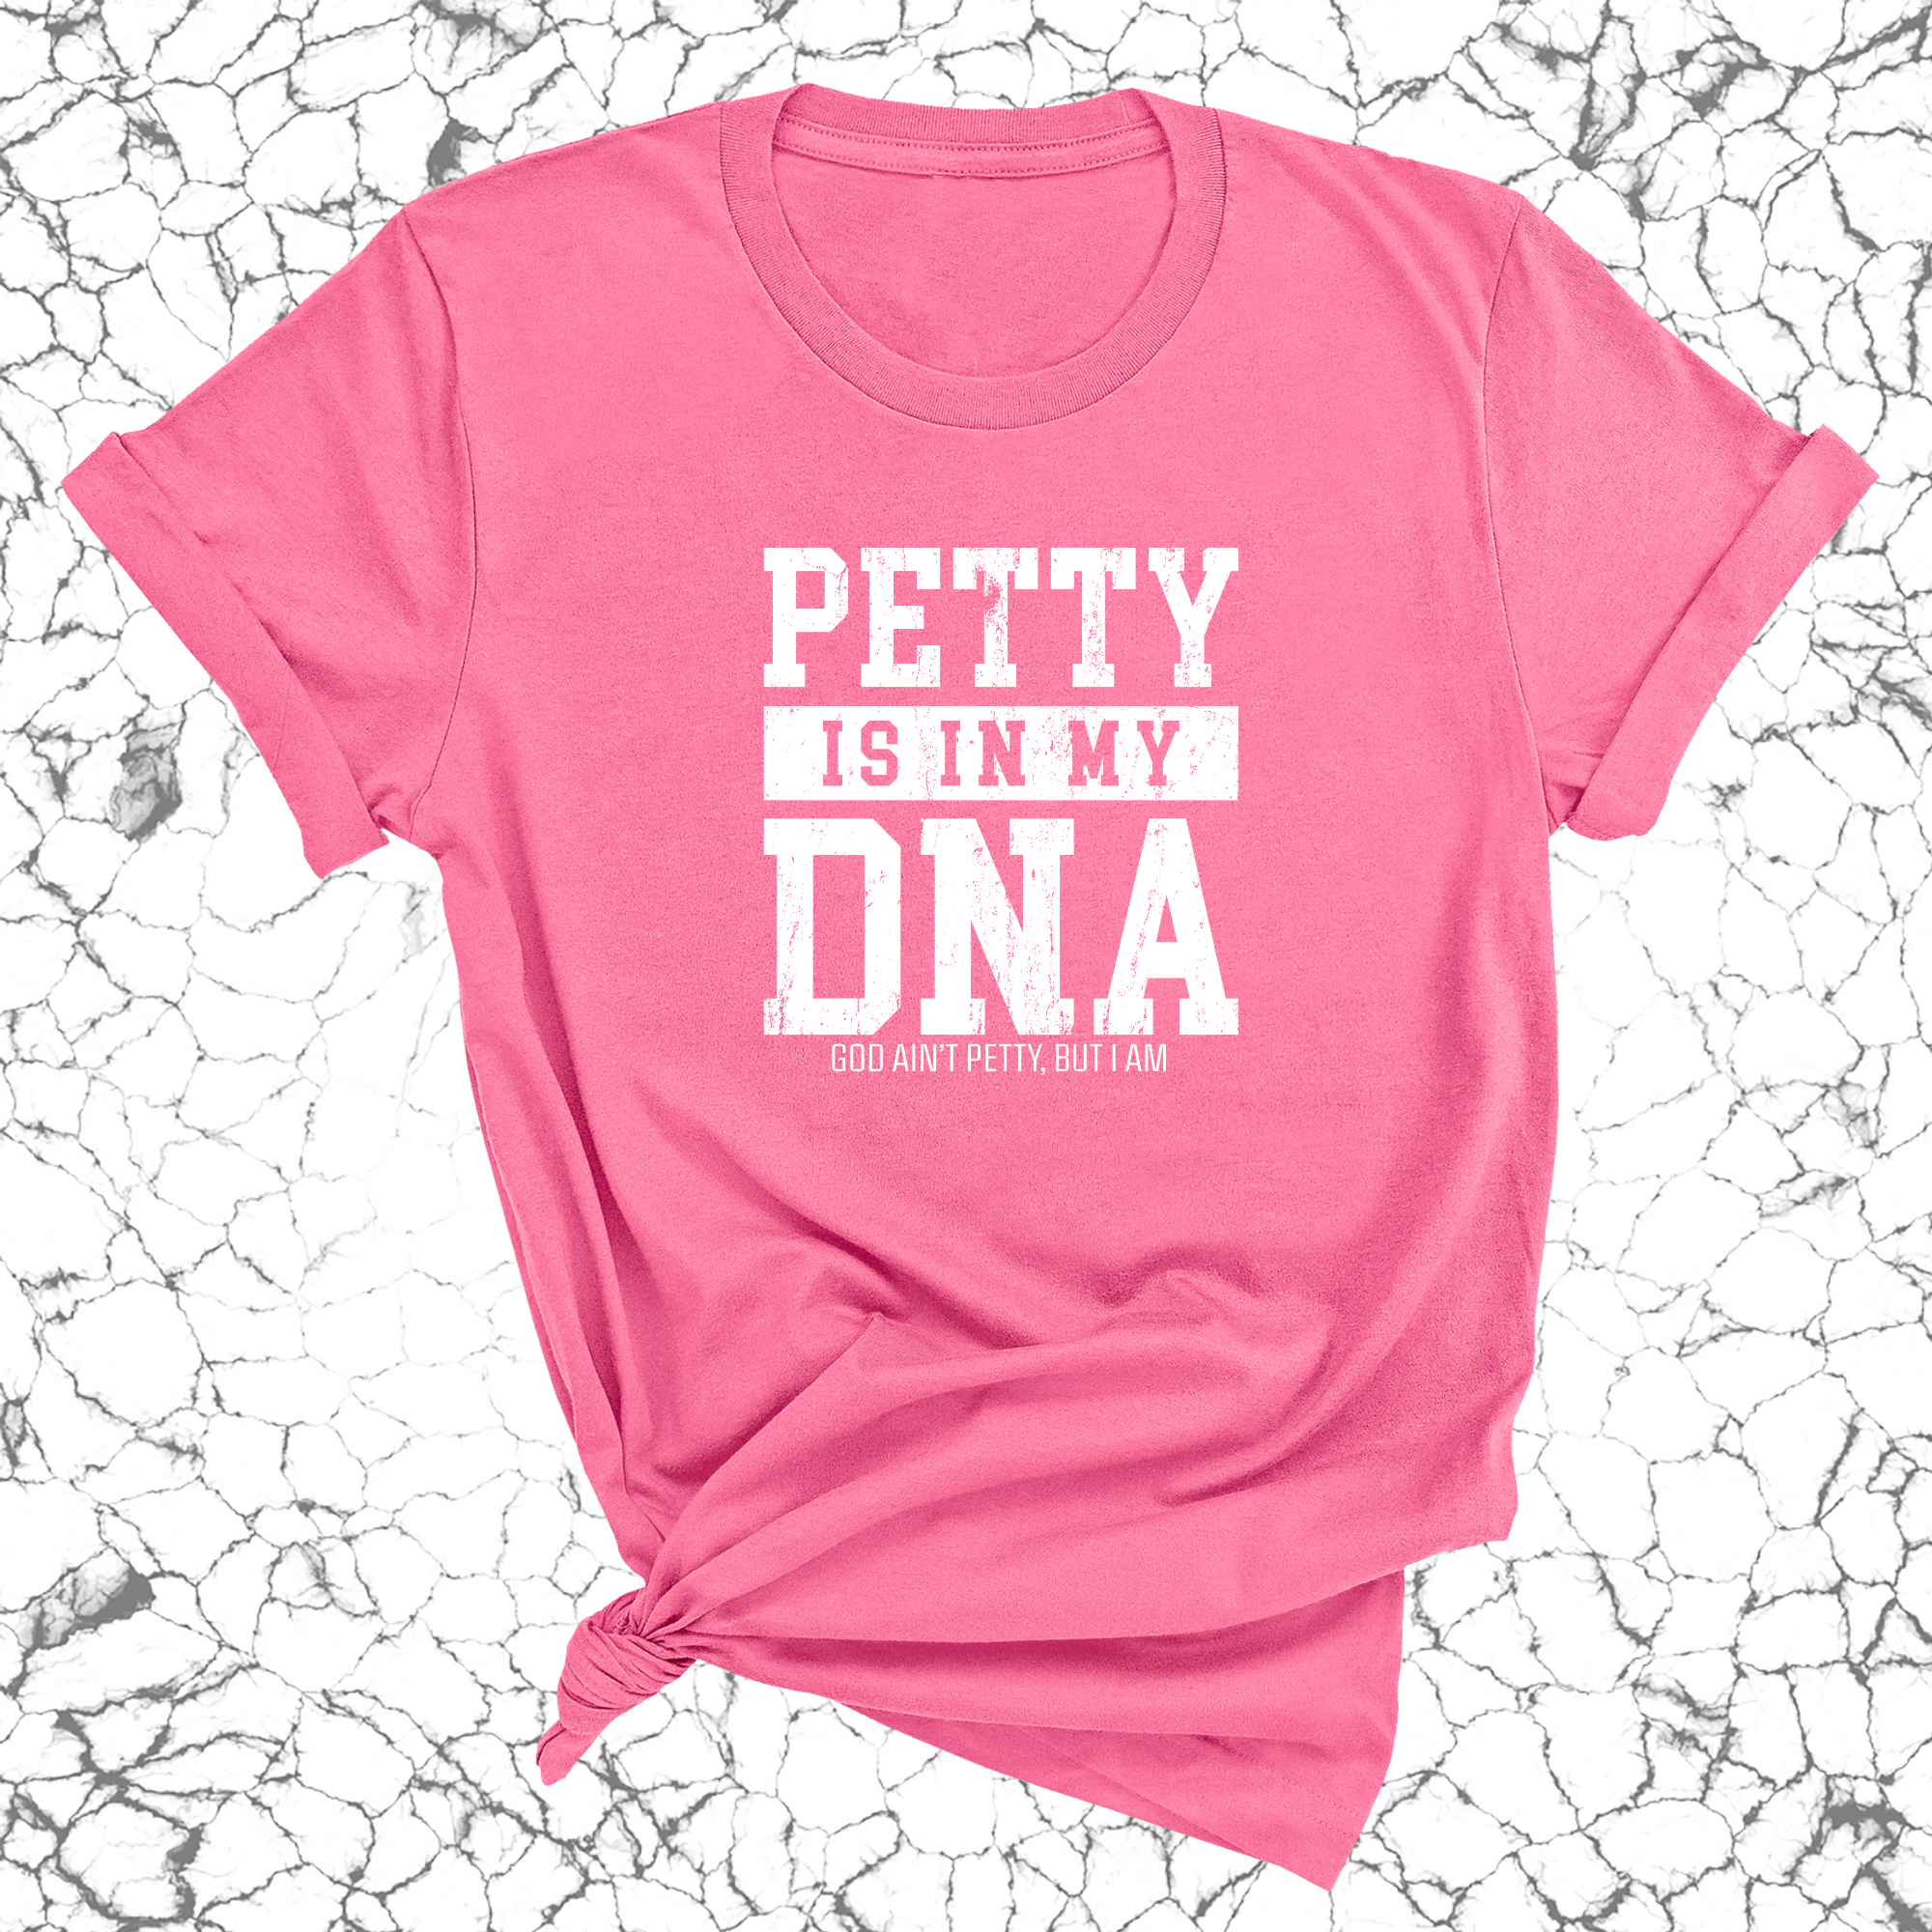 Petty is in my DNA Unisex Tee-T-Shirt-The Original God Ain't Petty But I Am